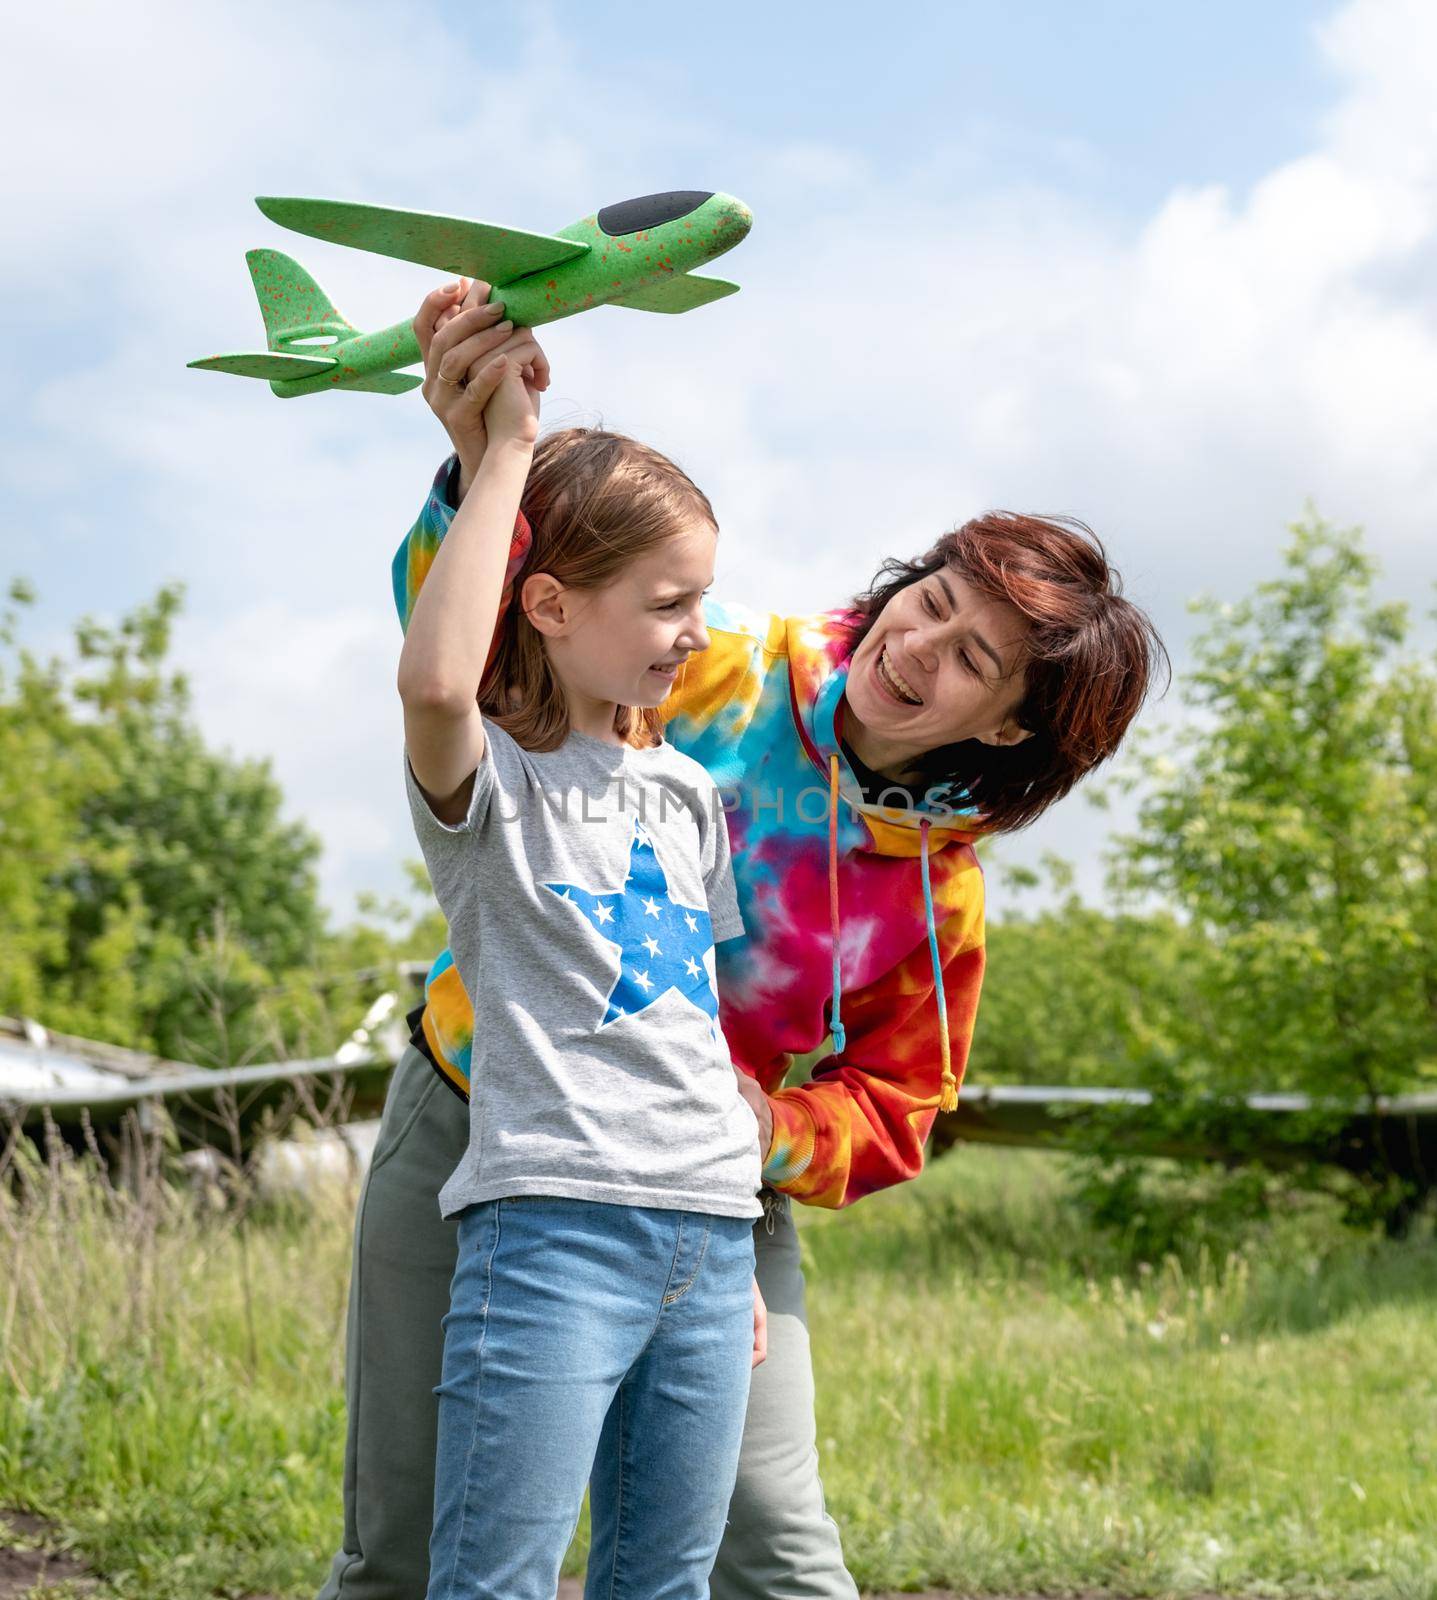 Mother and daughter child playing with toy plane at the field together with real airplane on background and smiling looking at each other. Happy family moments at the nature